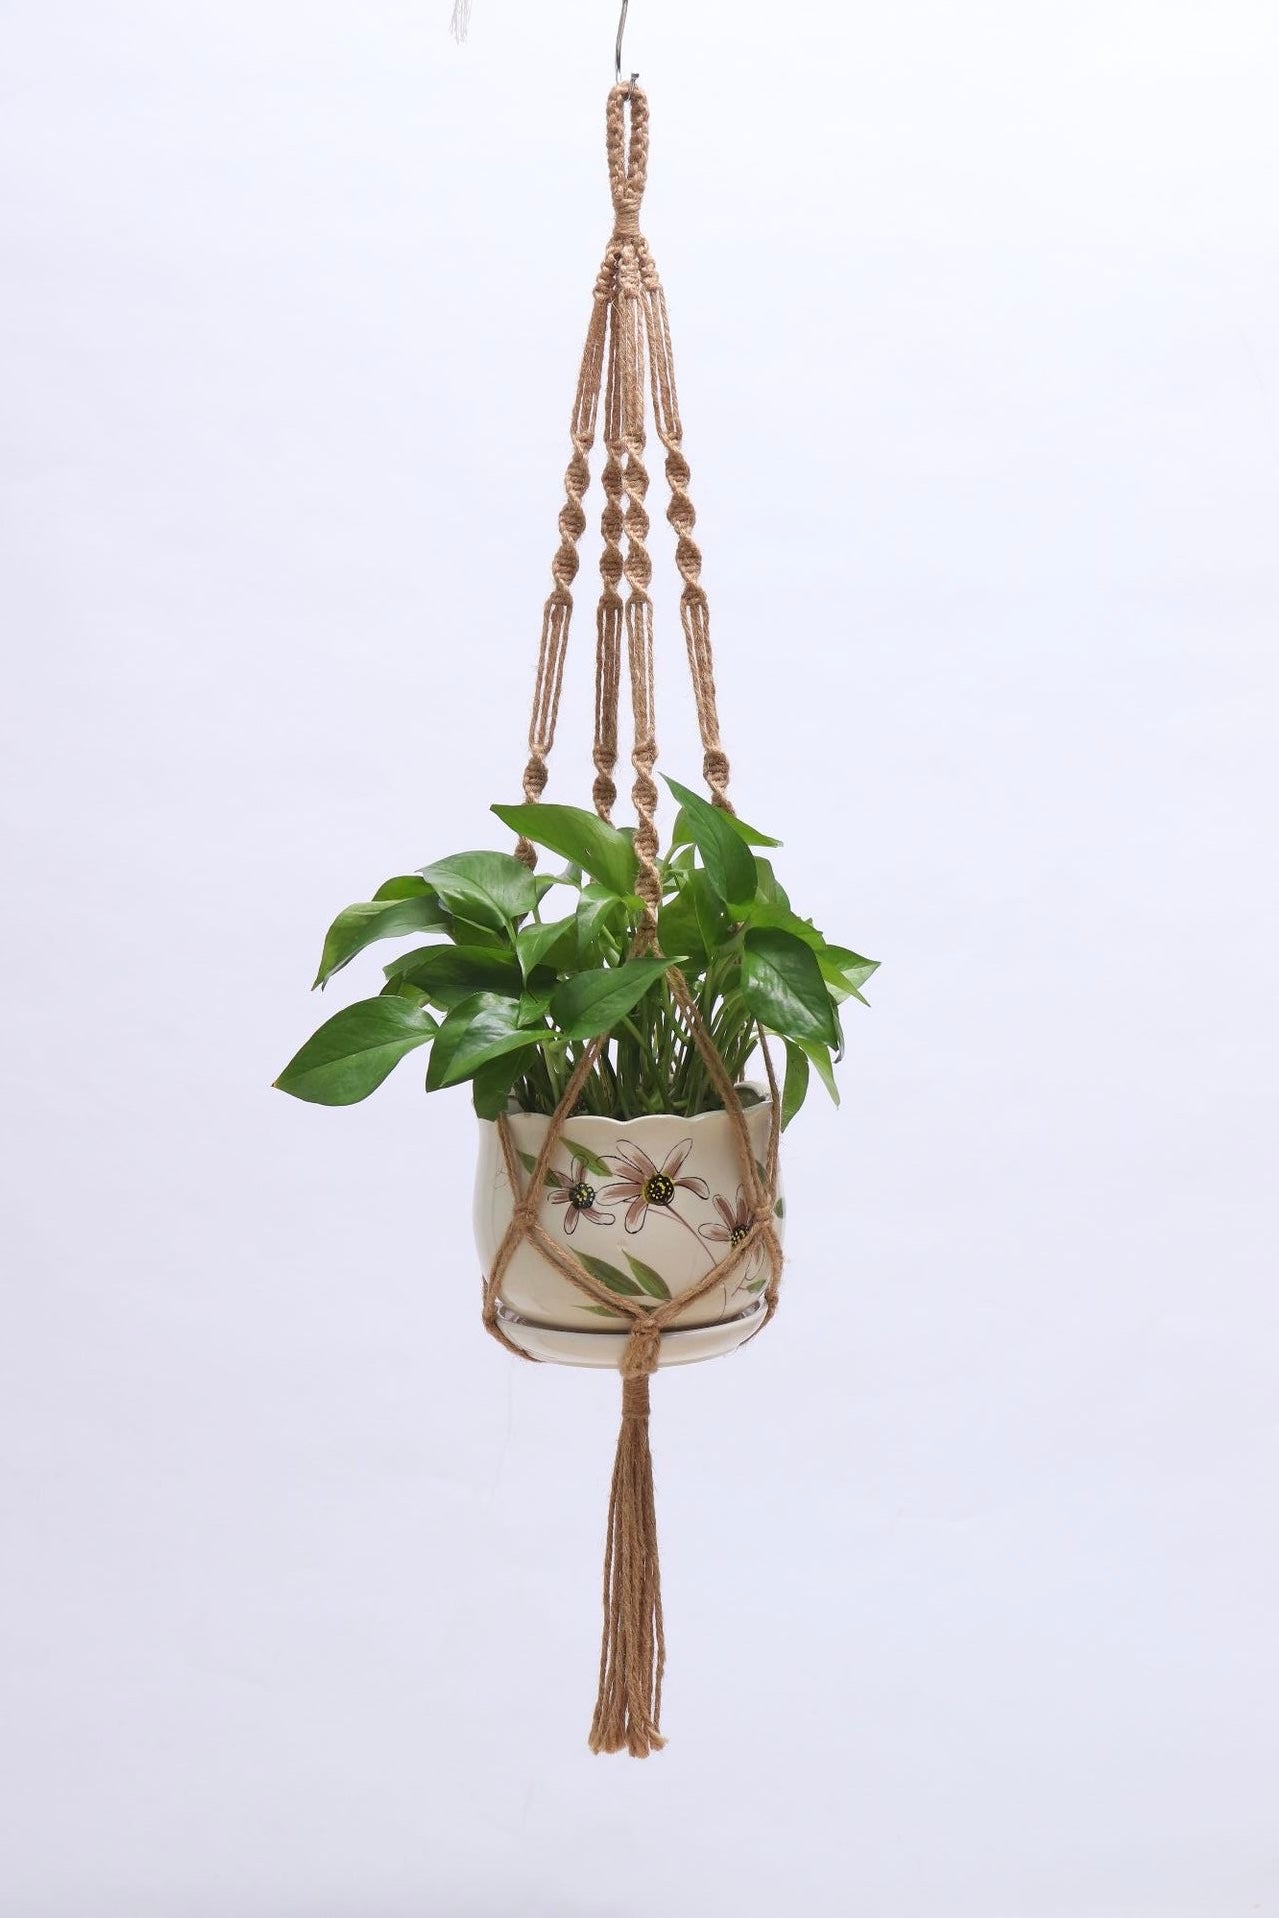 Hanging Planter Basket, 31.5 Inches High, Handwoven Cotton Rope Net, Plant Hanging Basket, Indoor Outdoor Bohemian Style Home Decor, Pot Not Included